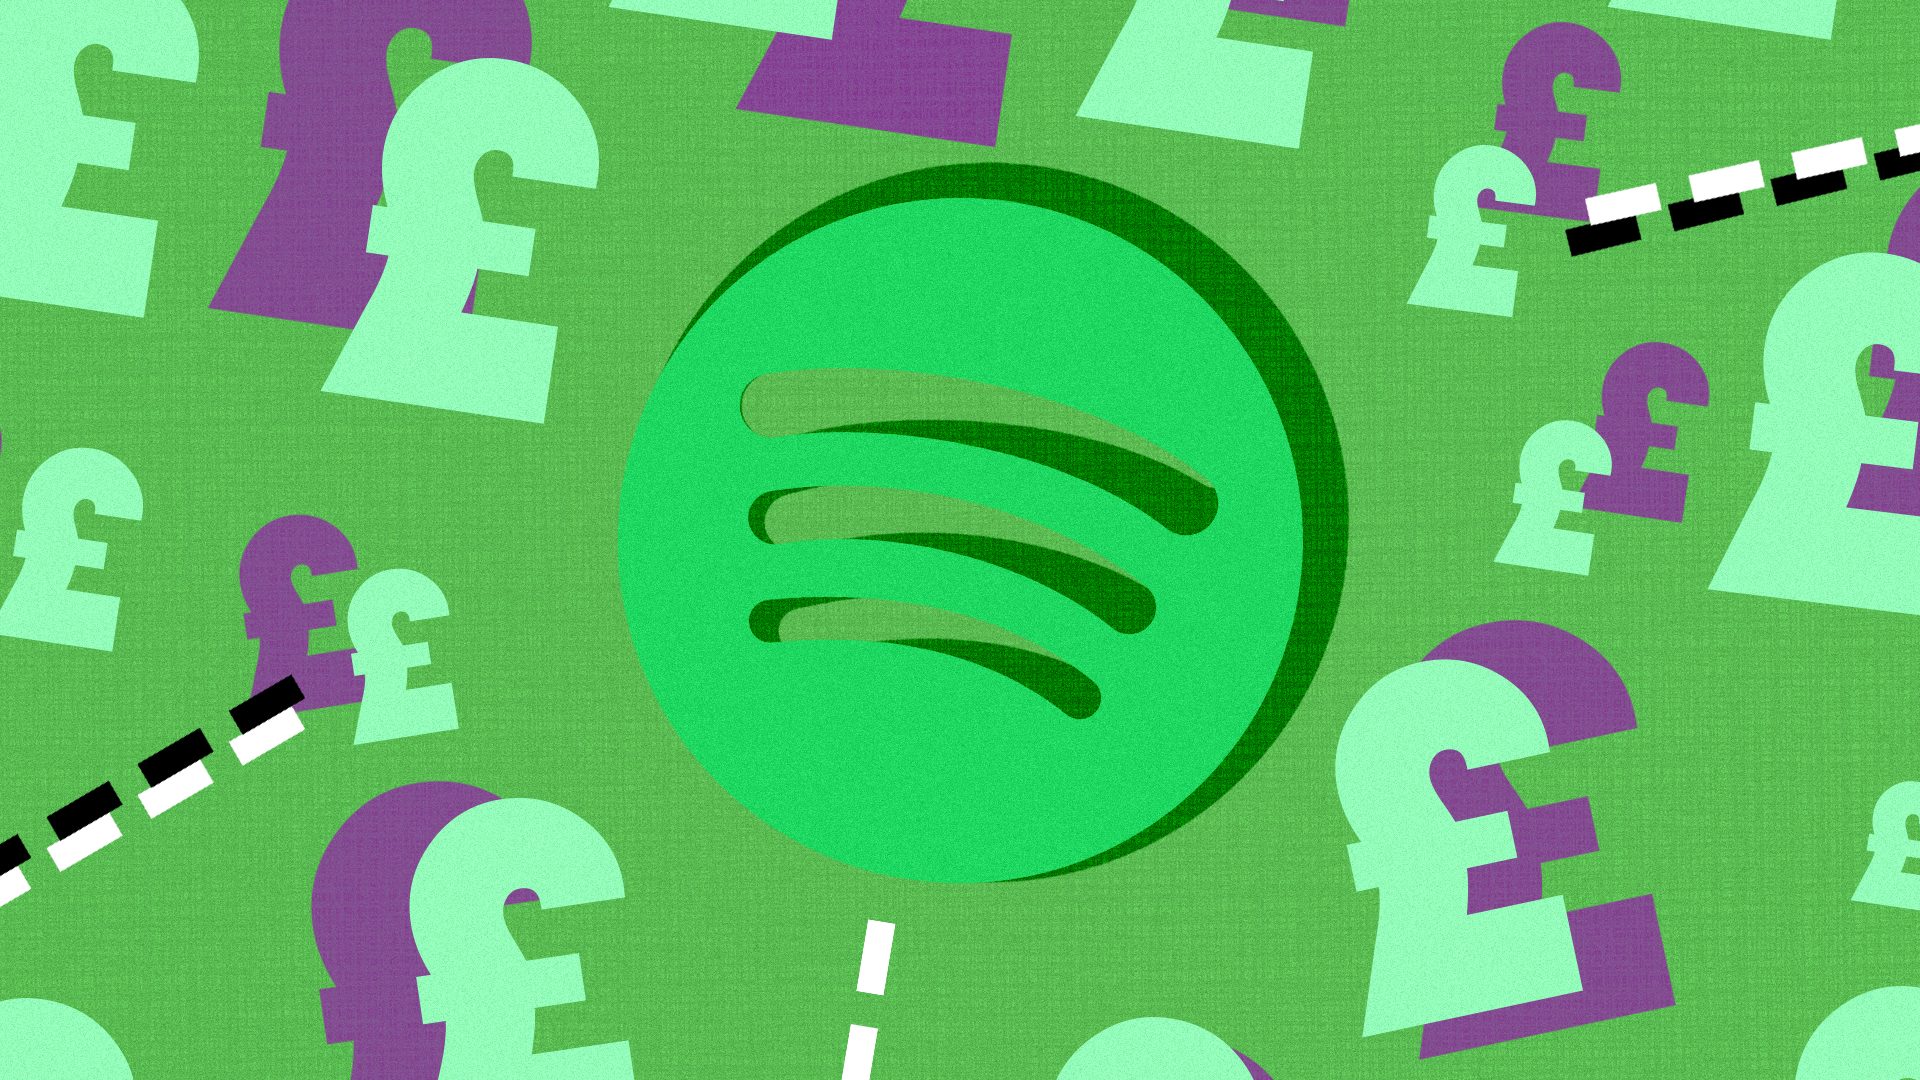 Spotify lays off 6% of work force in latest tech cuts